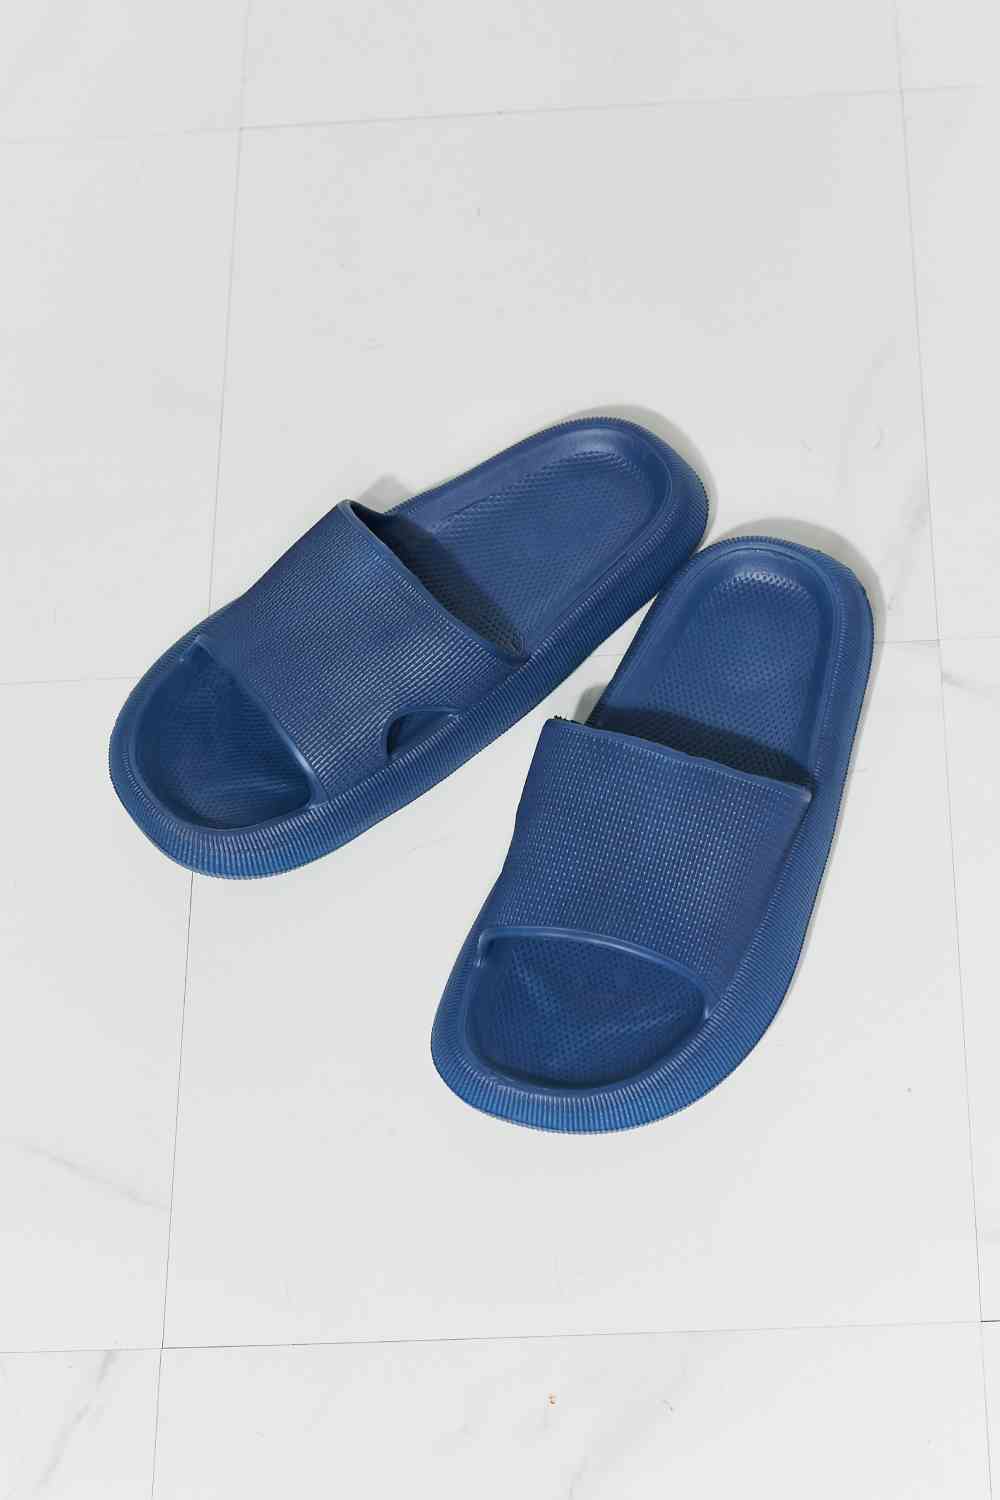 MMShoes Arms Around Me Open Toe Slide in Navy - Guy Christopher